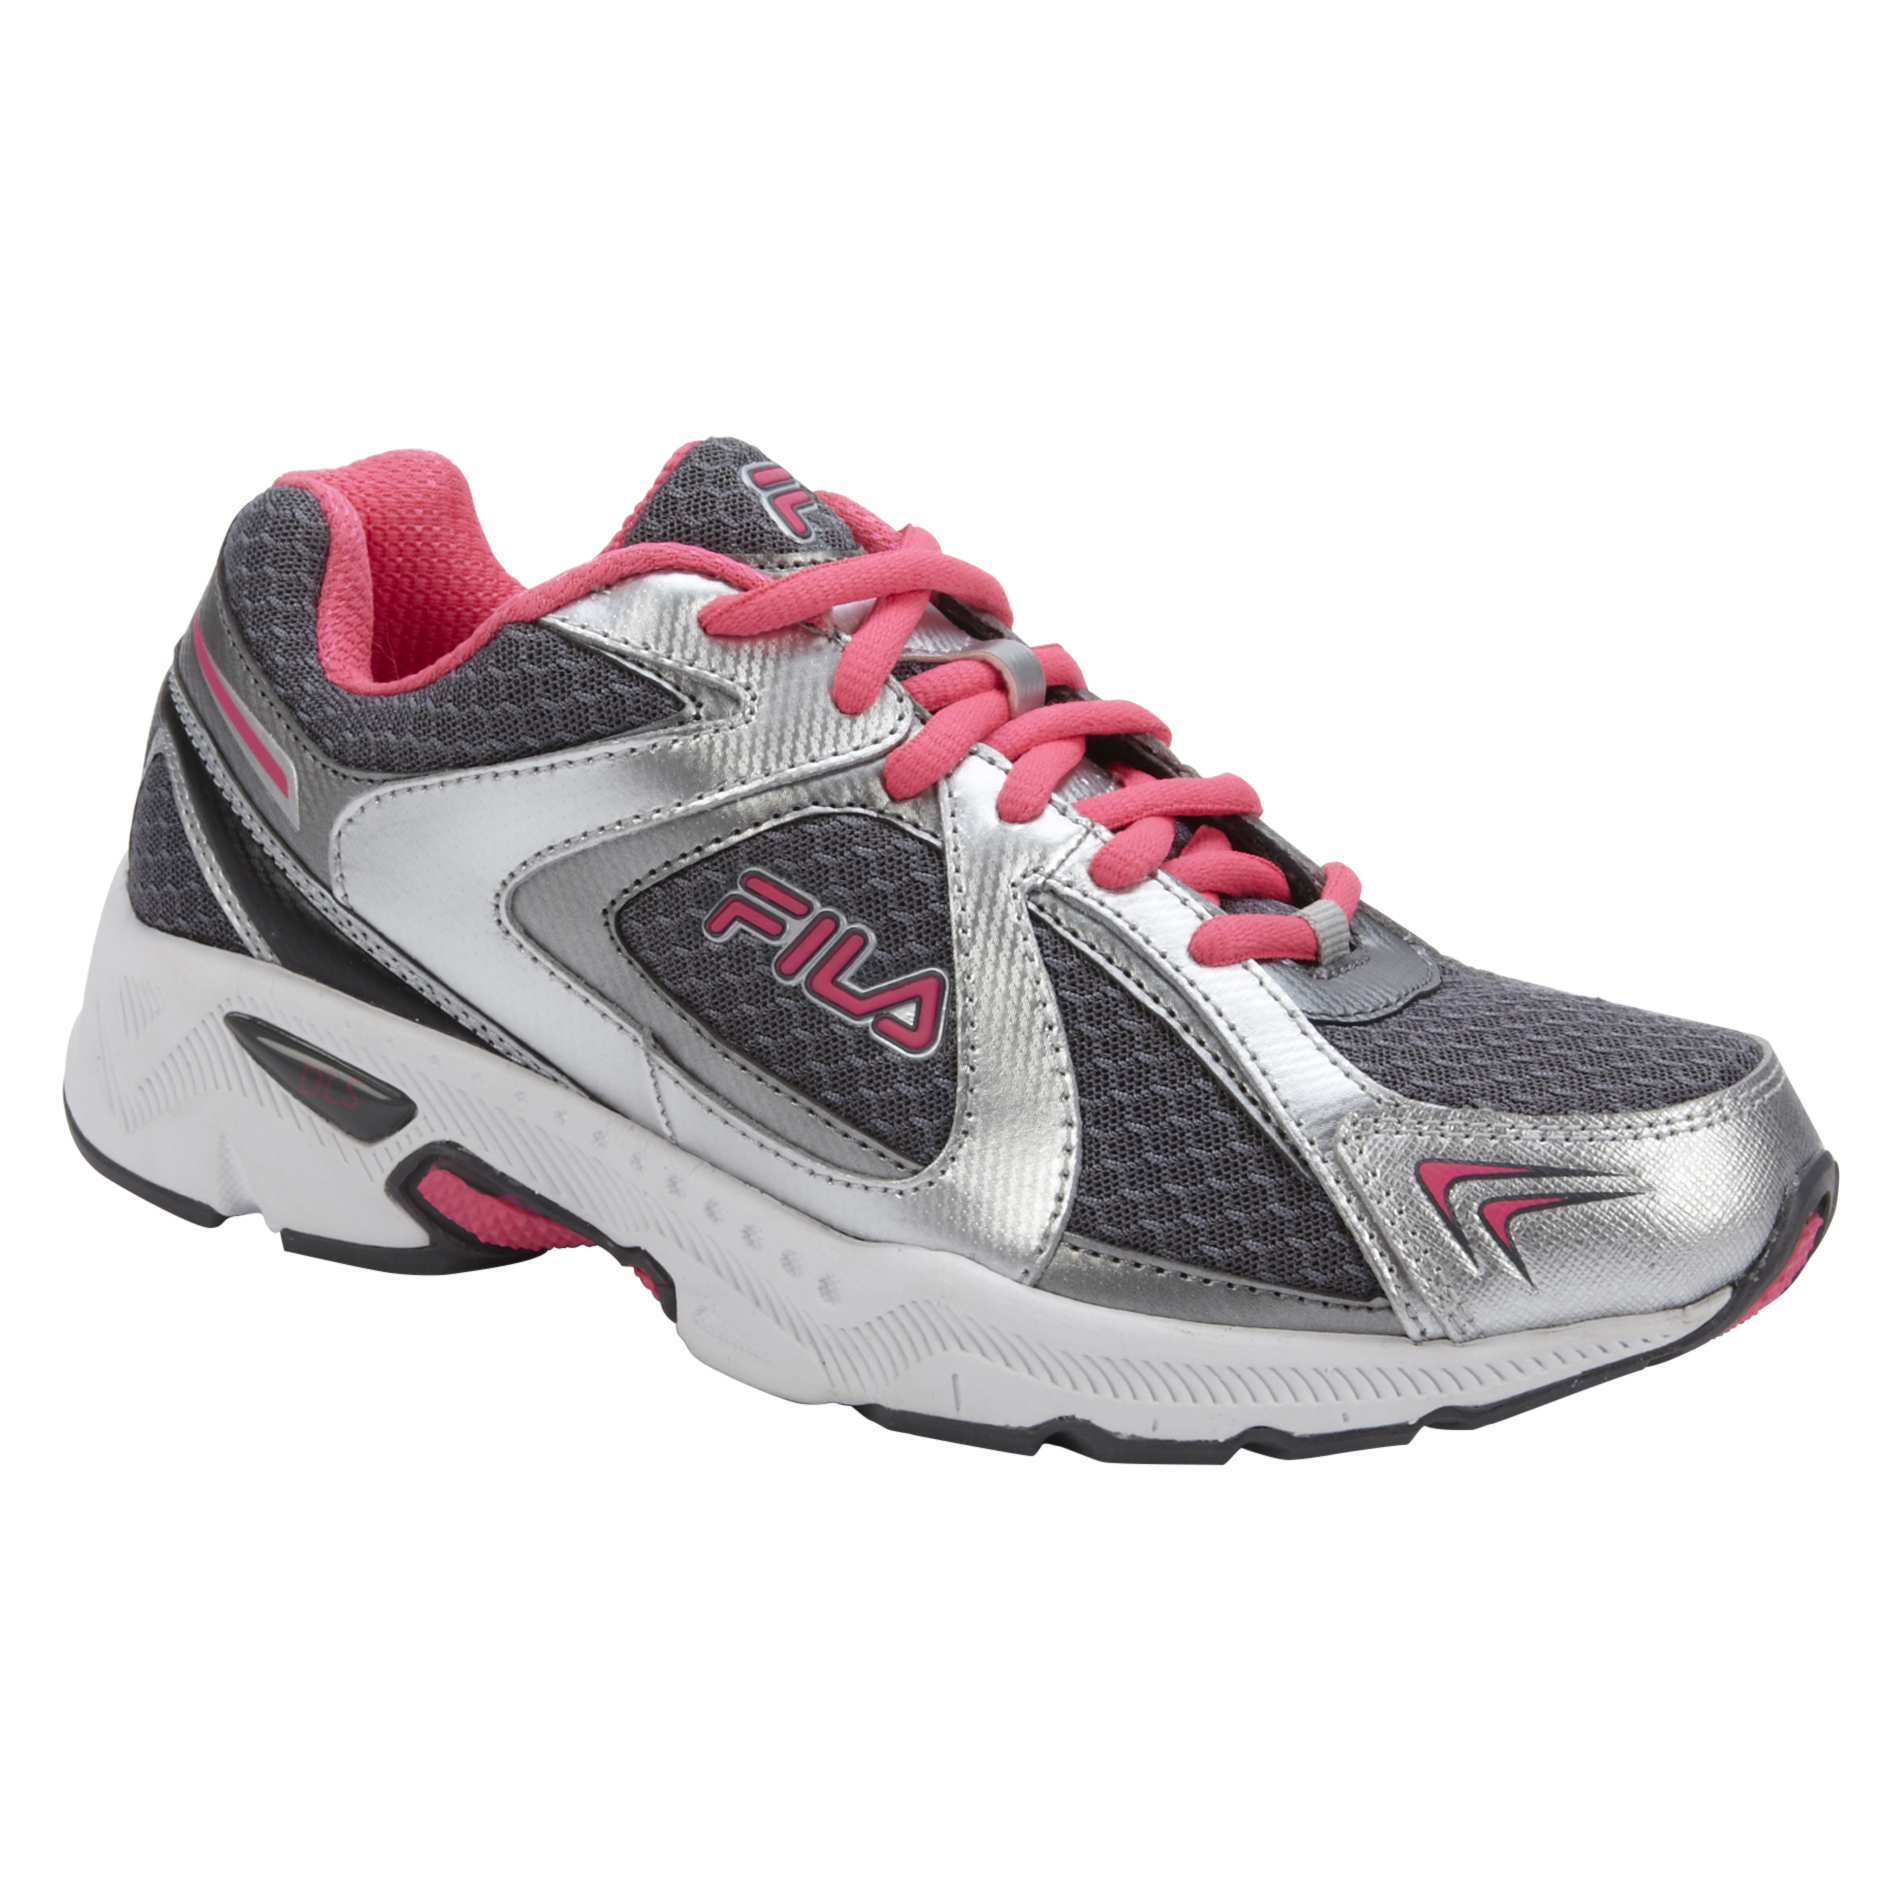 Fila Women's On The Go Running Athletic Shoe - Grey/Pink